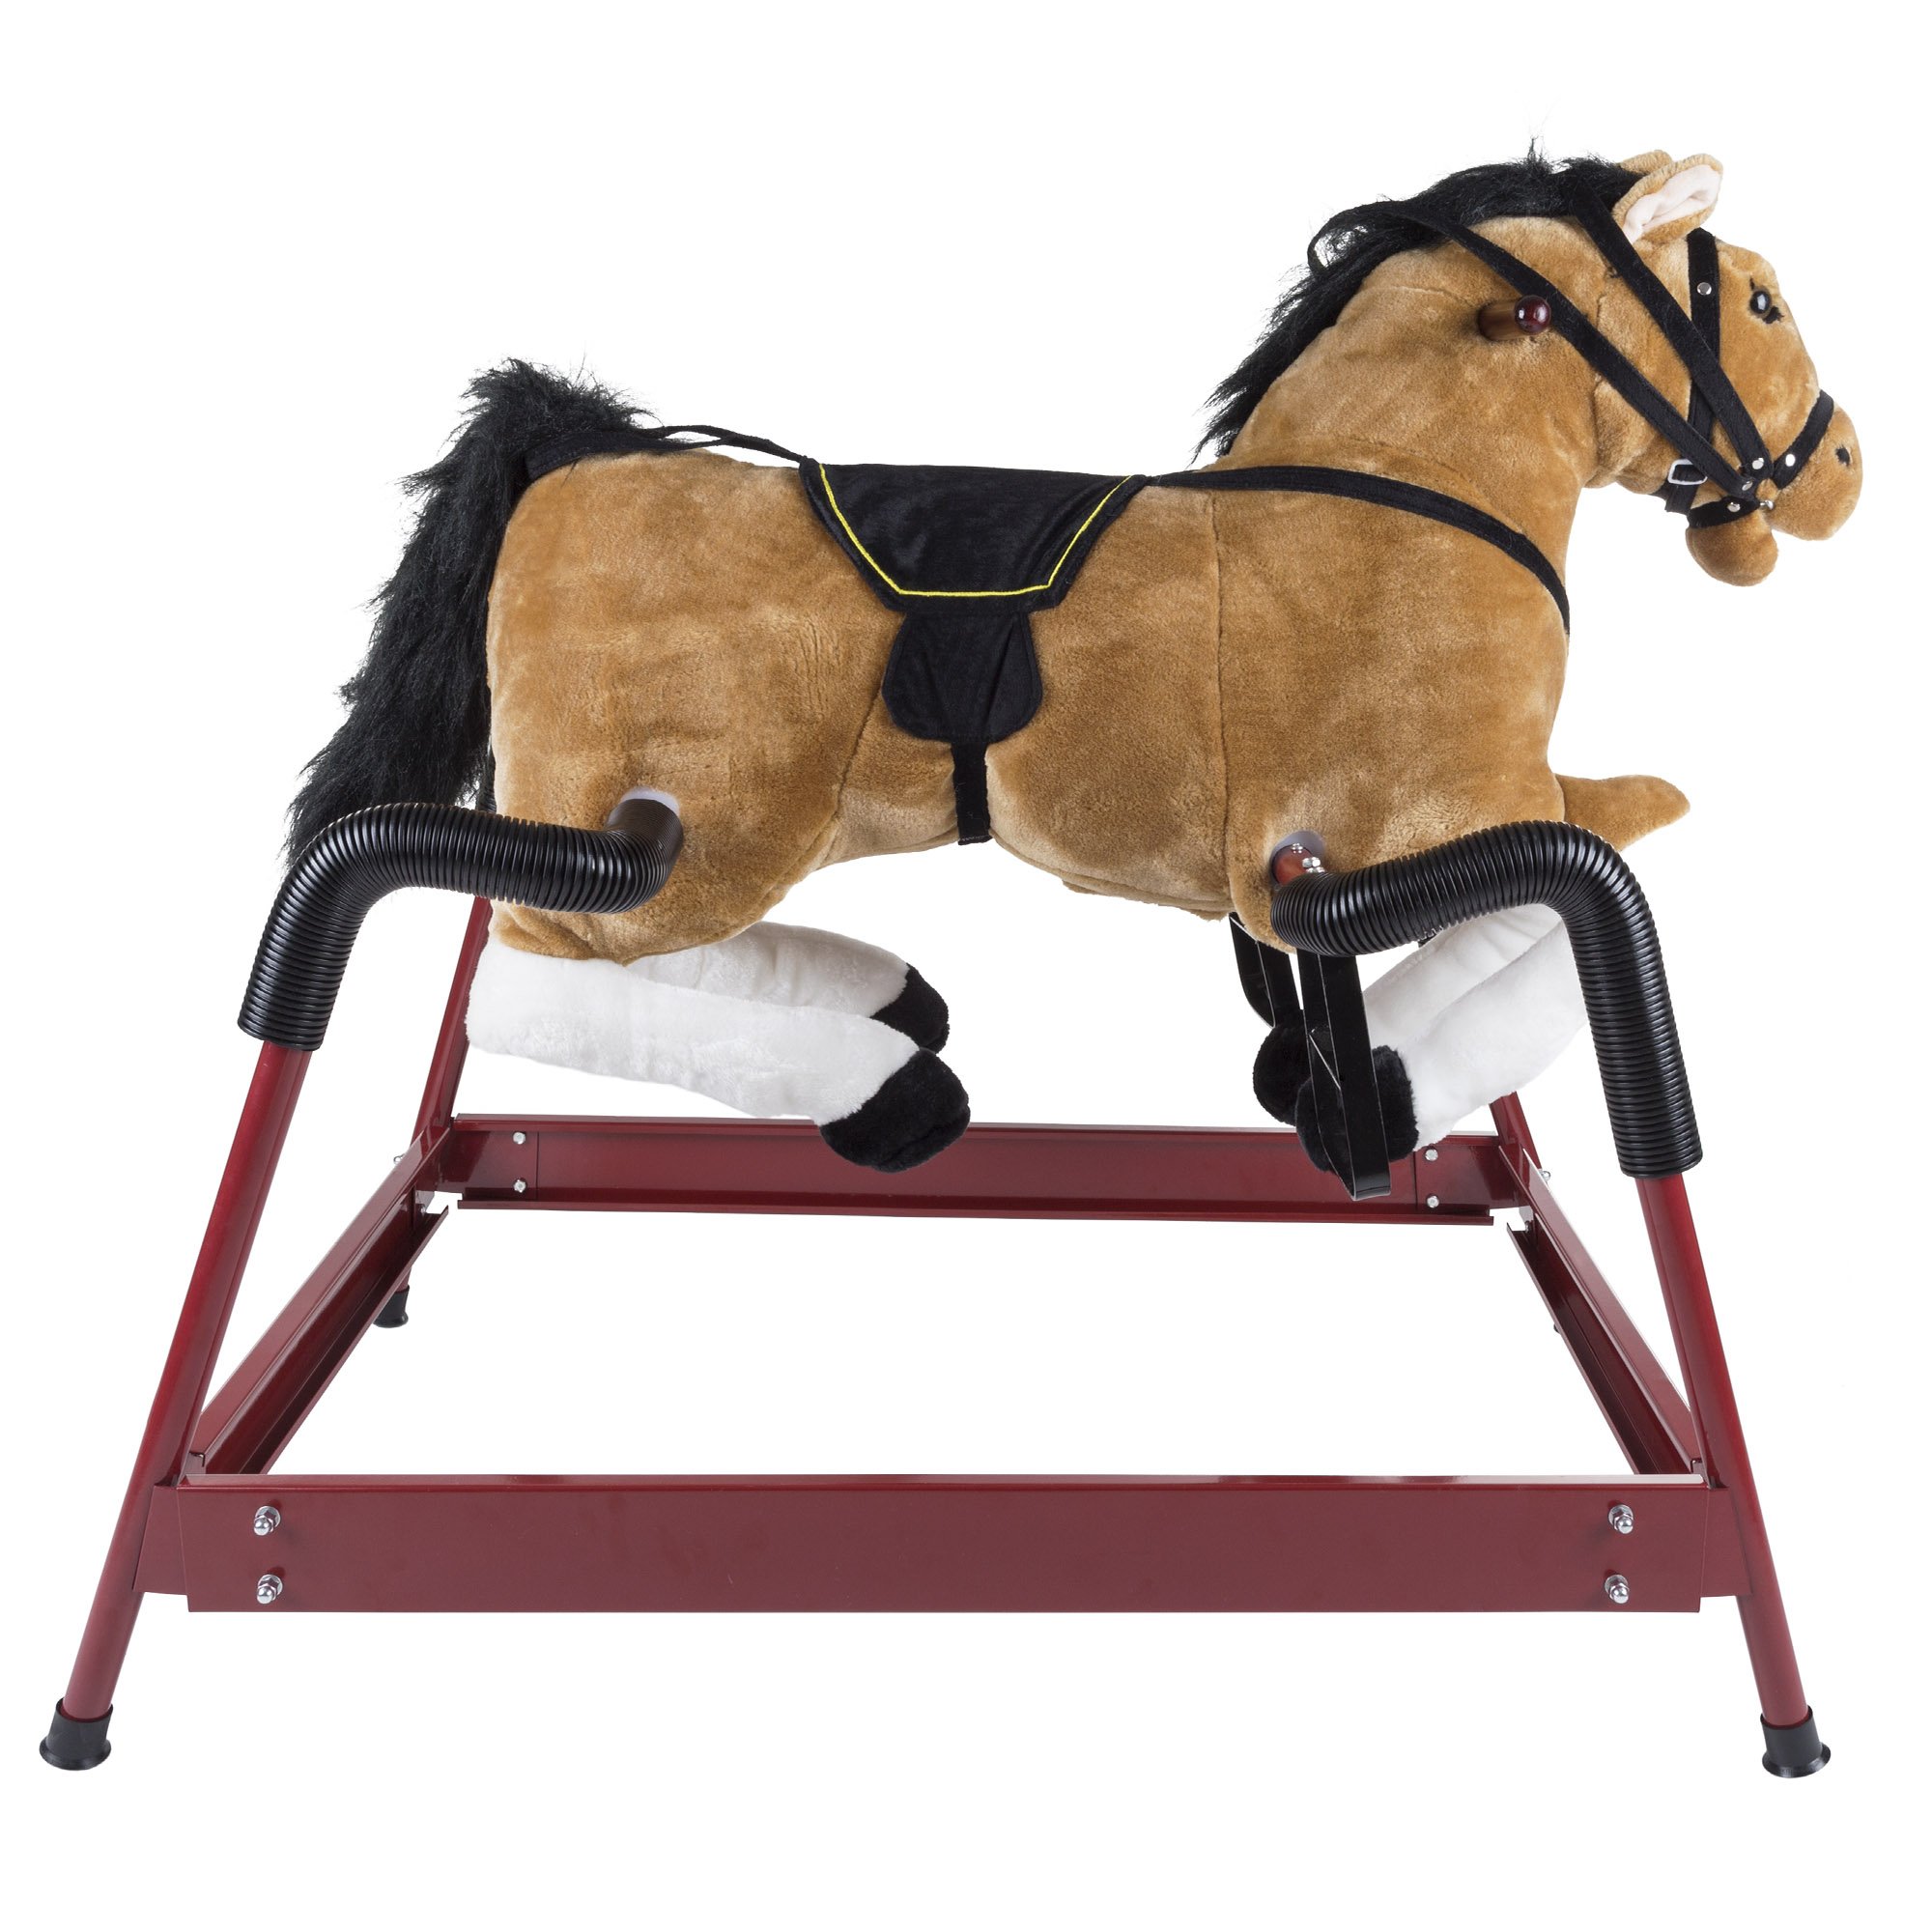 Spring Rocking Horse Plush Ride on Toy with Adjustable Foot Stirrups and Sounds for Toddlers to 5 Years Old by Happy Trails - Brown